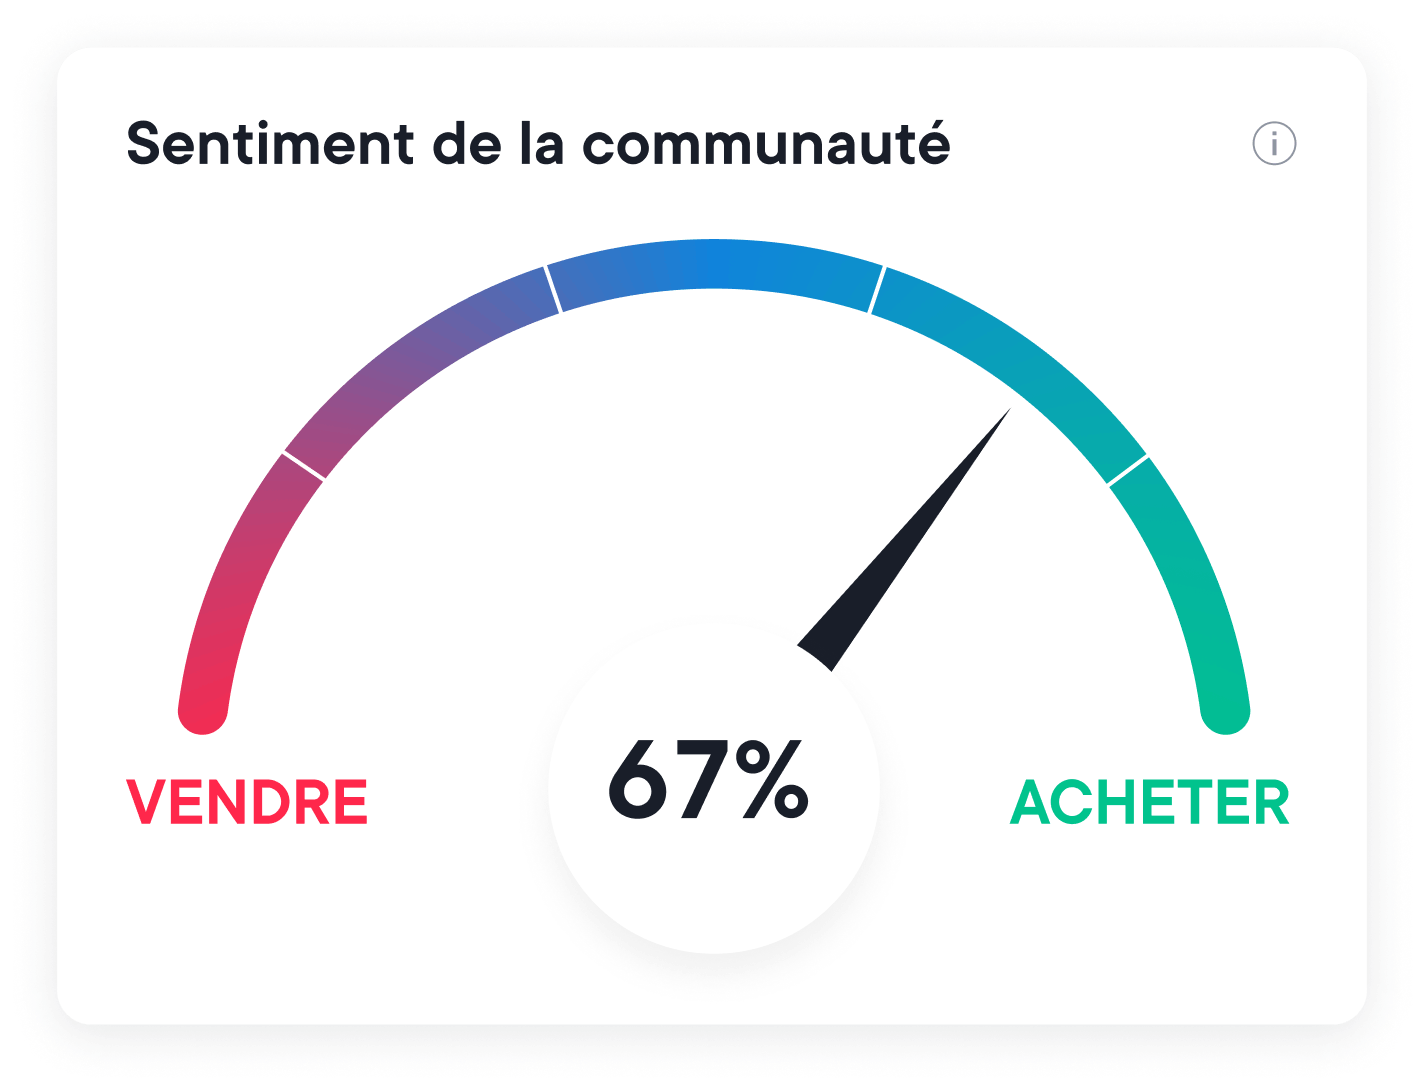 Asset analysis community sentiment card in french